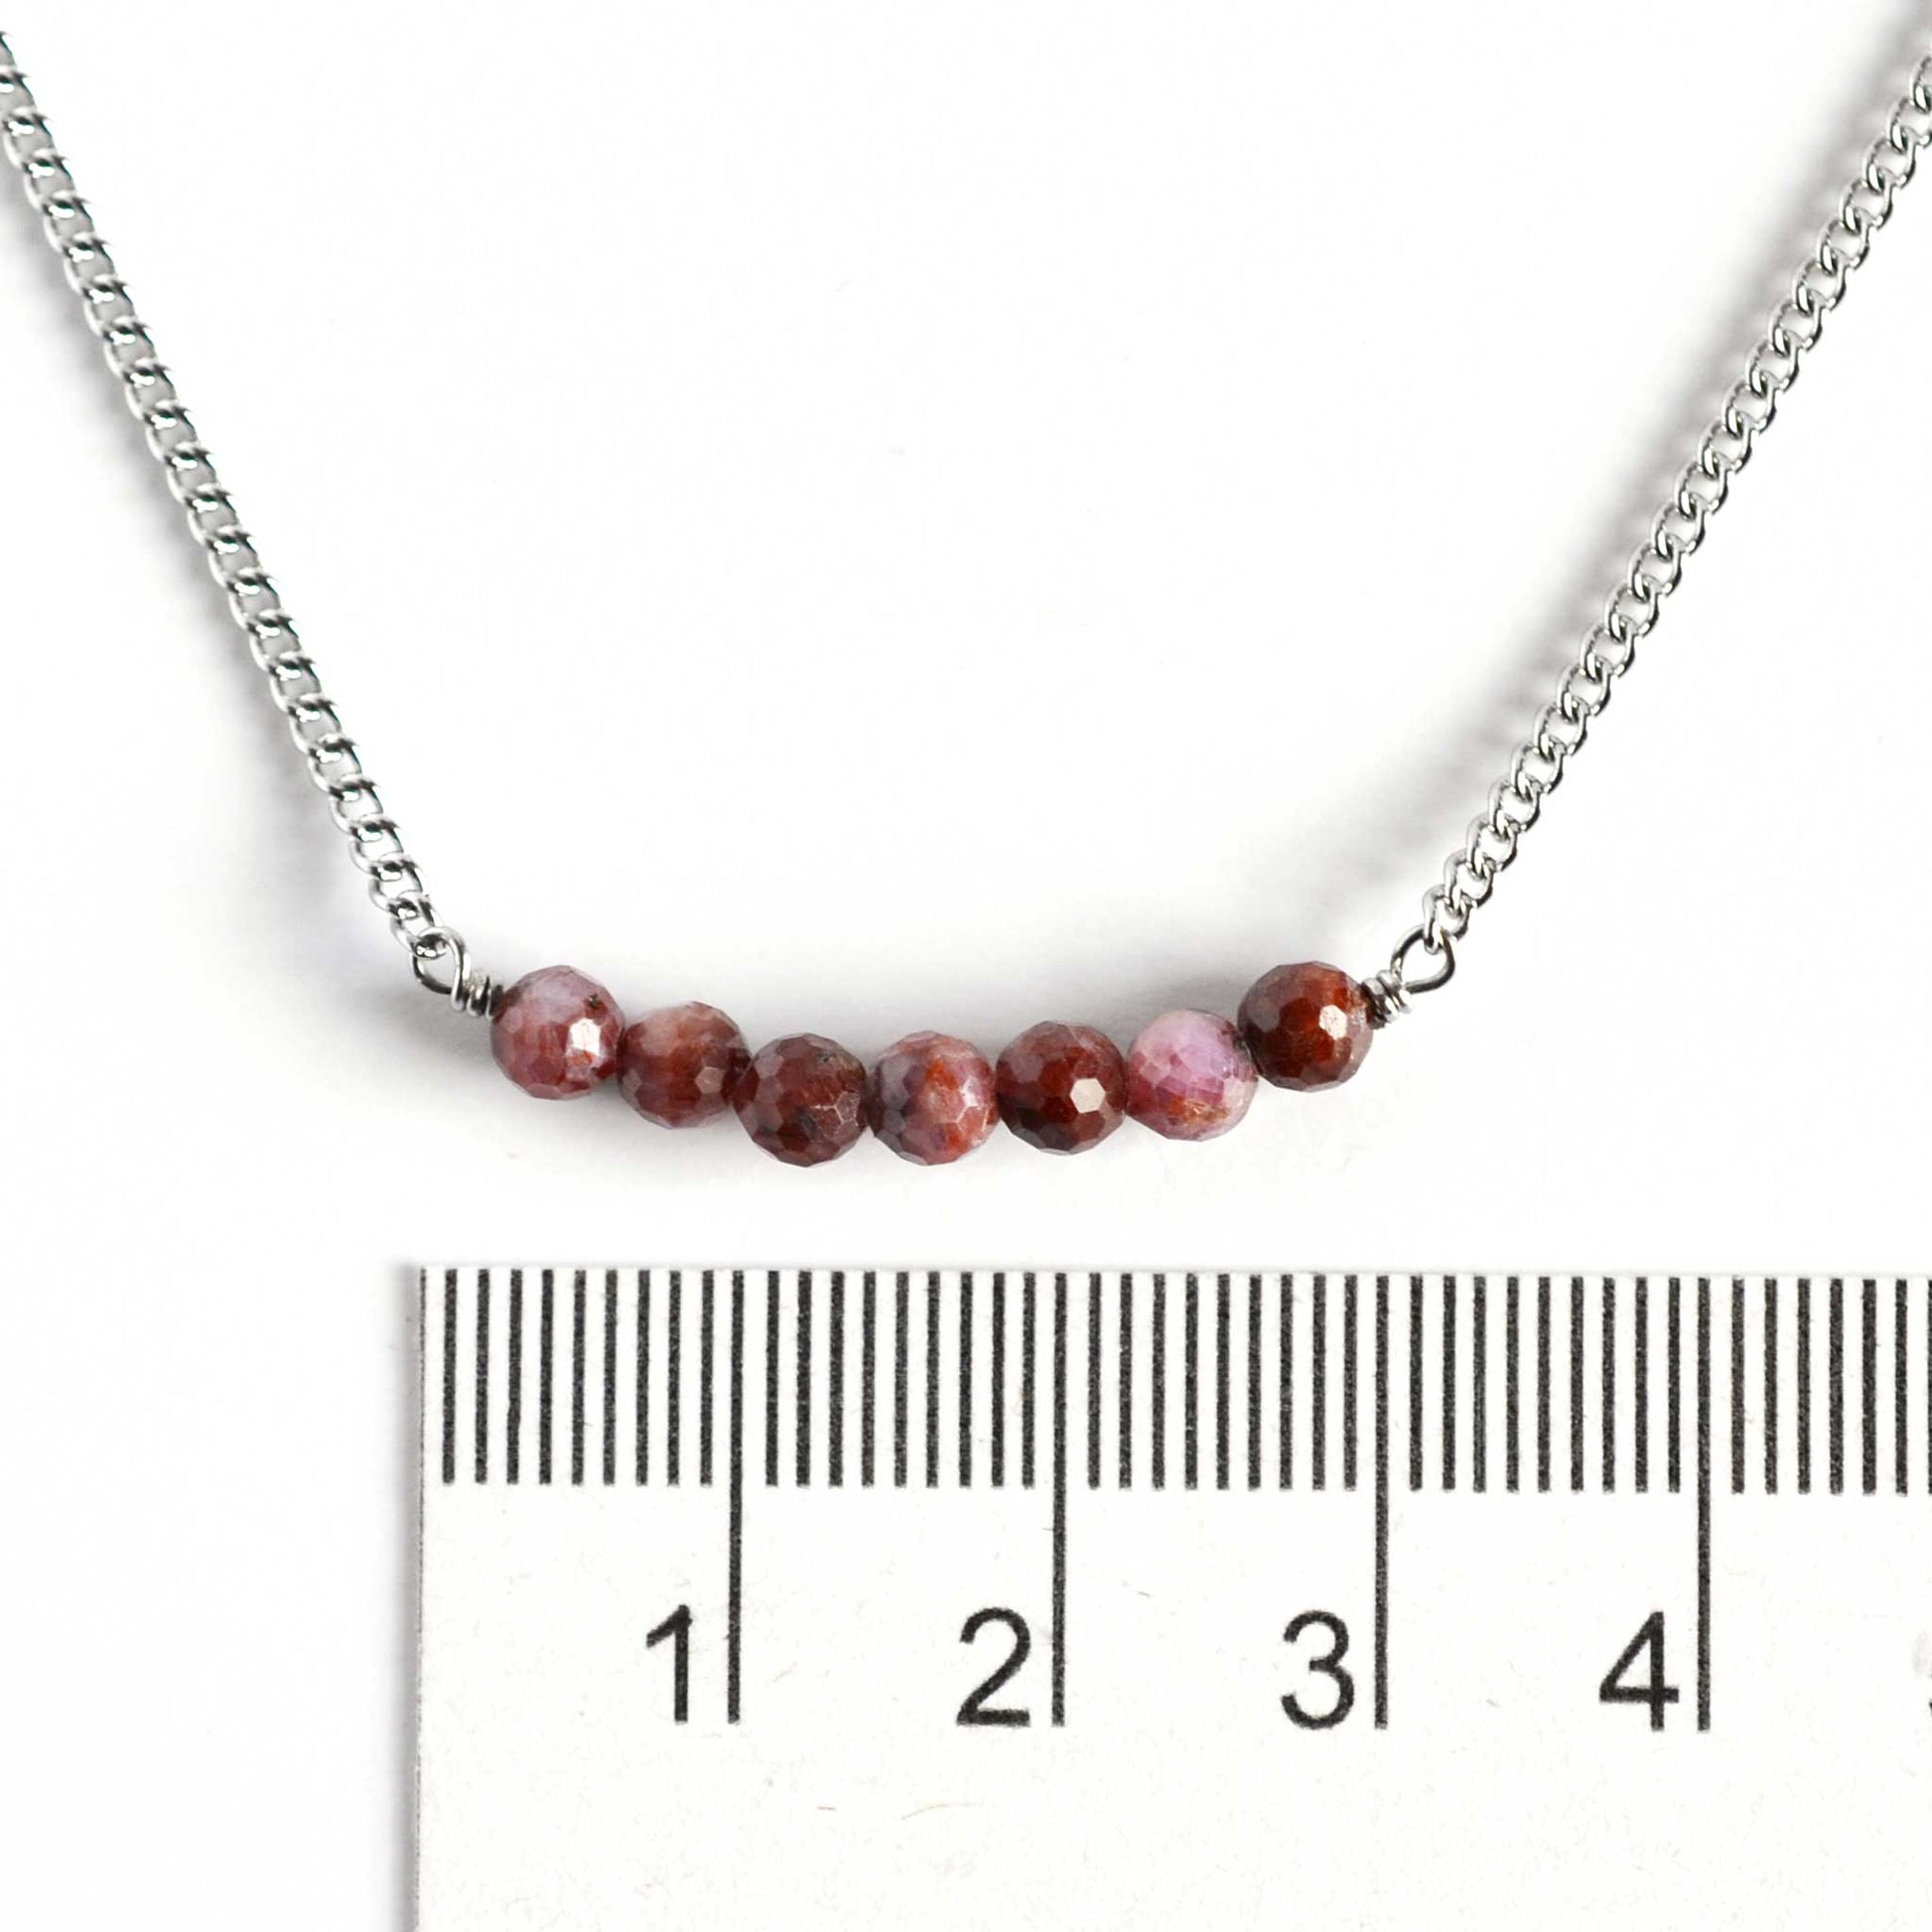 Dainty Ruby necklace with 4mm gemstone beads next to ruler